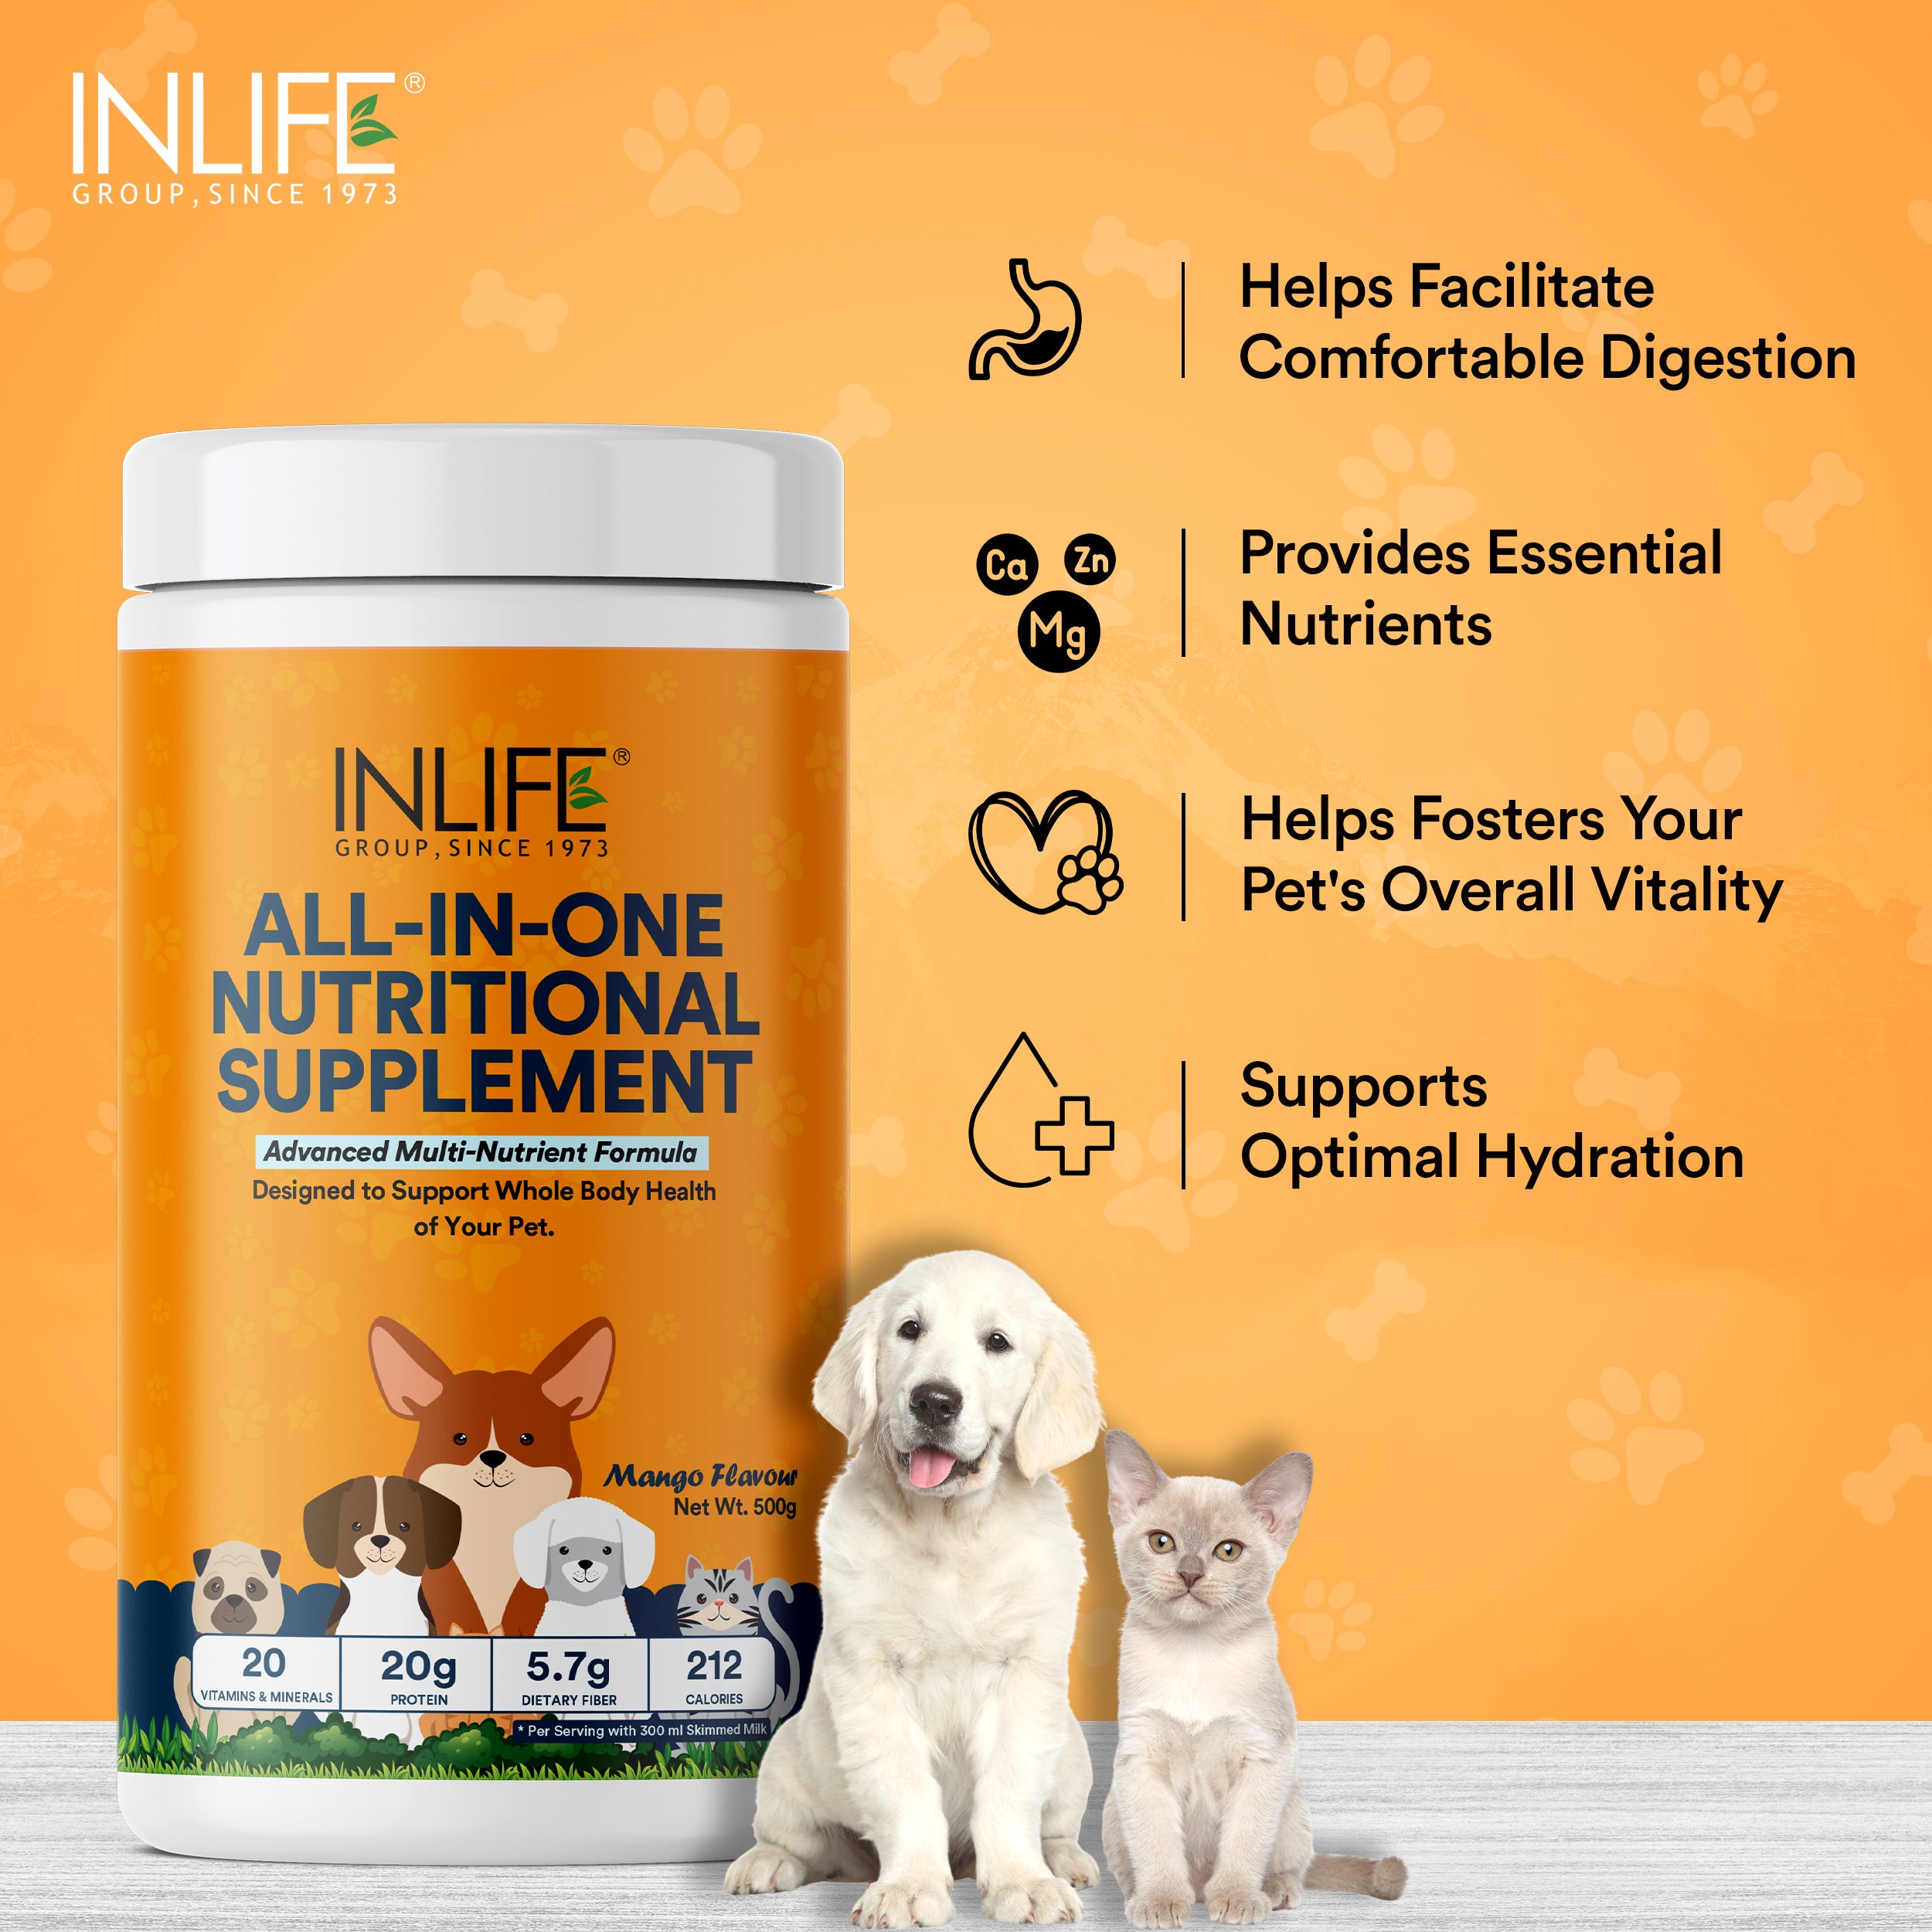 INLIFE Nutritional Meal Mix Powder for Dogs Cats Pets, Advanced Multi-Nutrient Formula